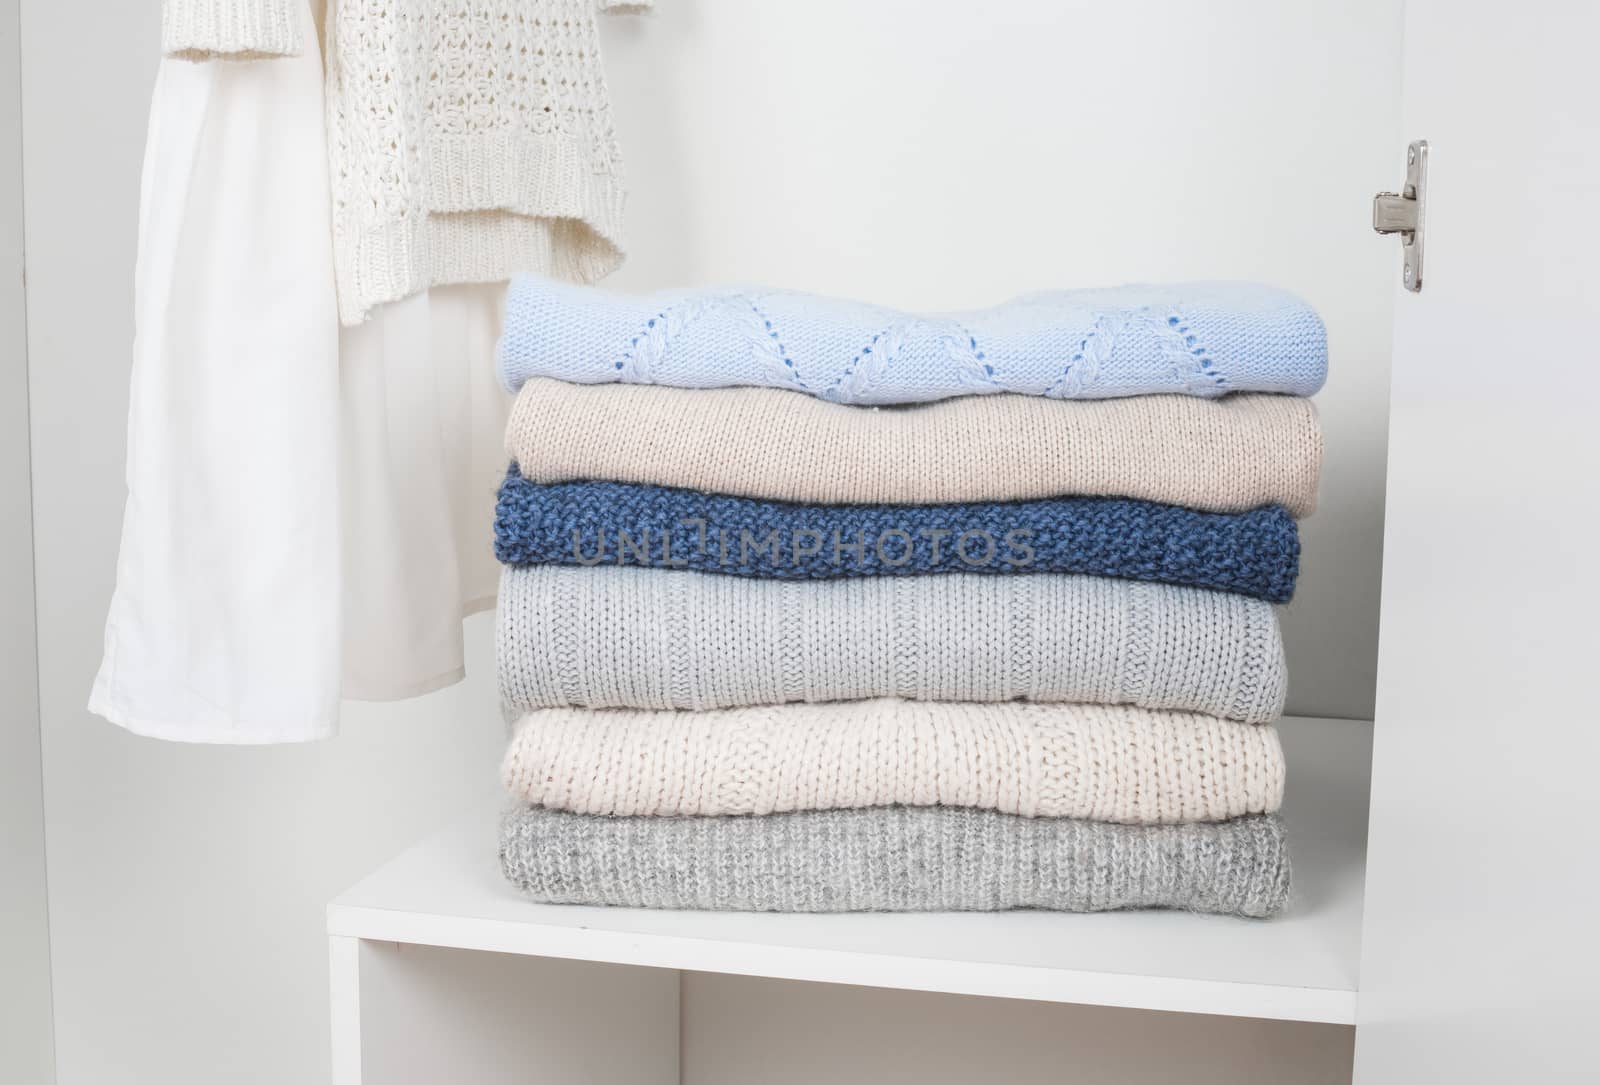  Stack of knitted warm woolen clothes in white wardrobe close up